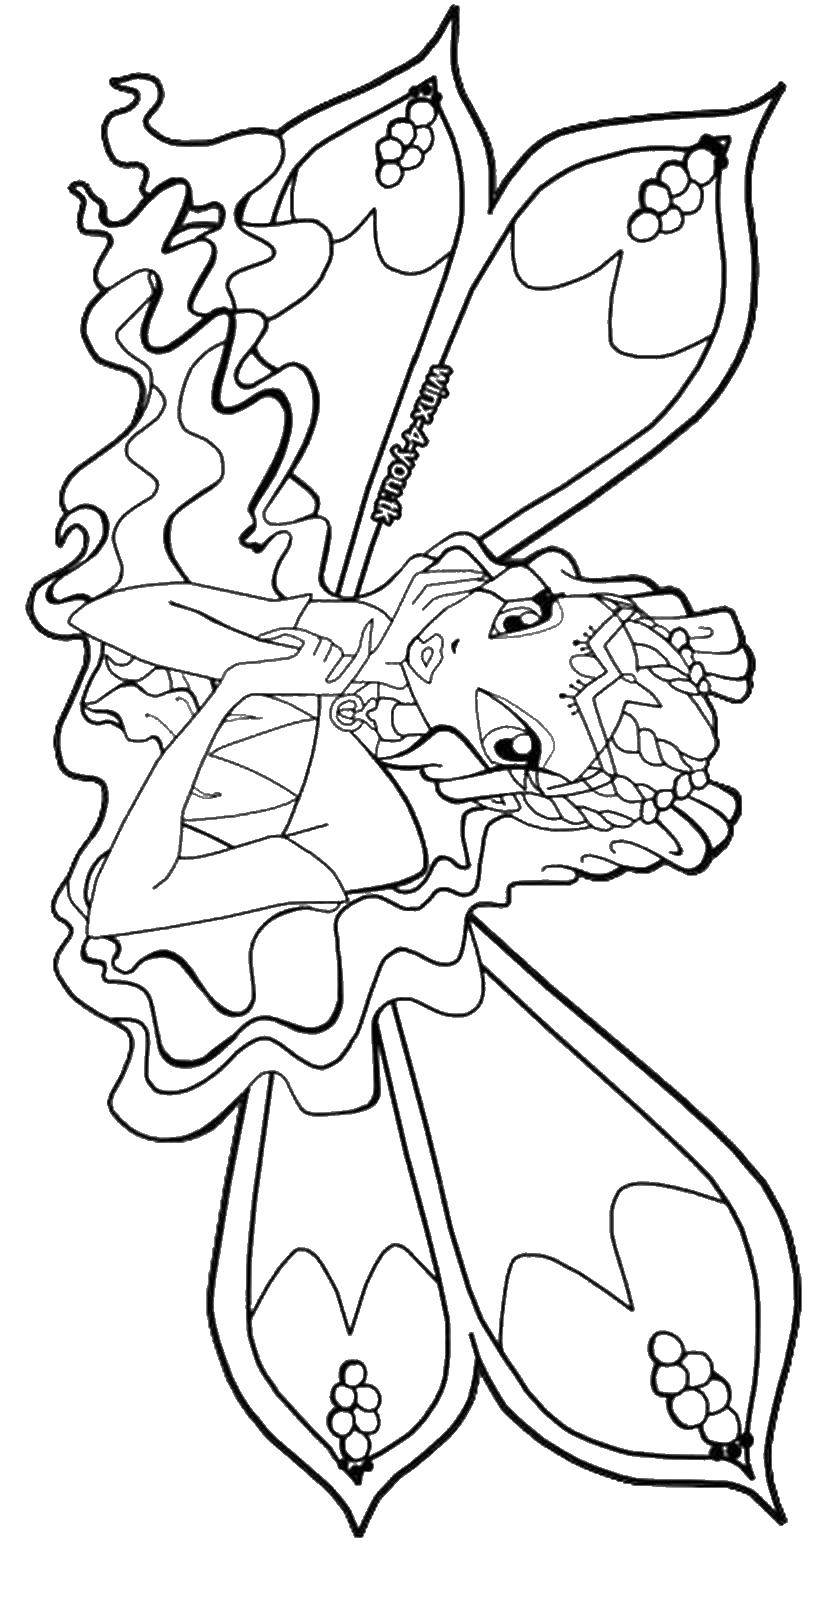 Online coloring pages coloring page kinky layla winx download print coloring page